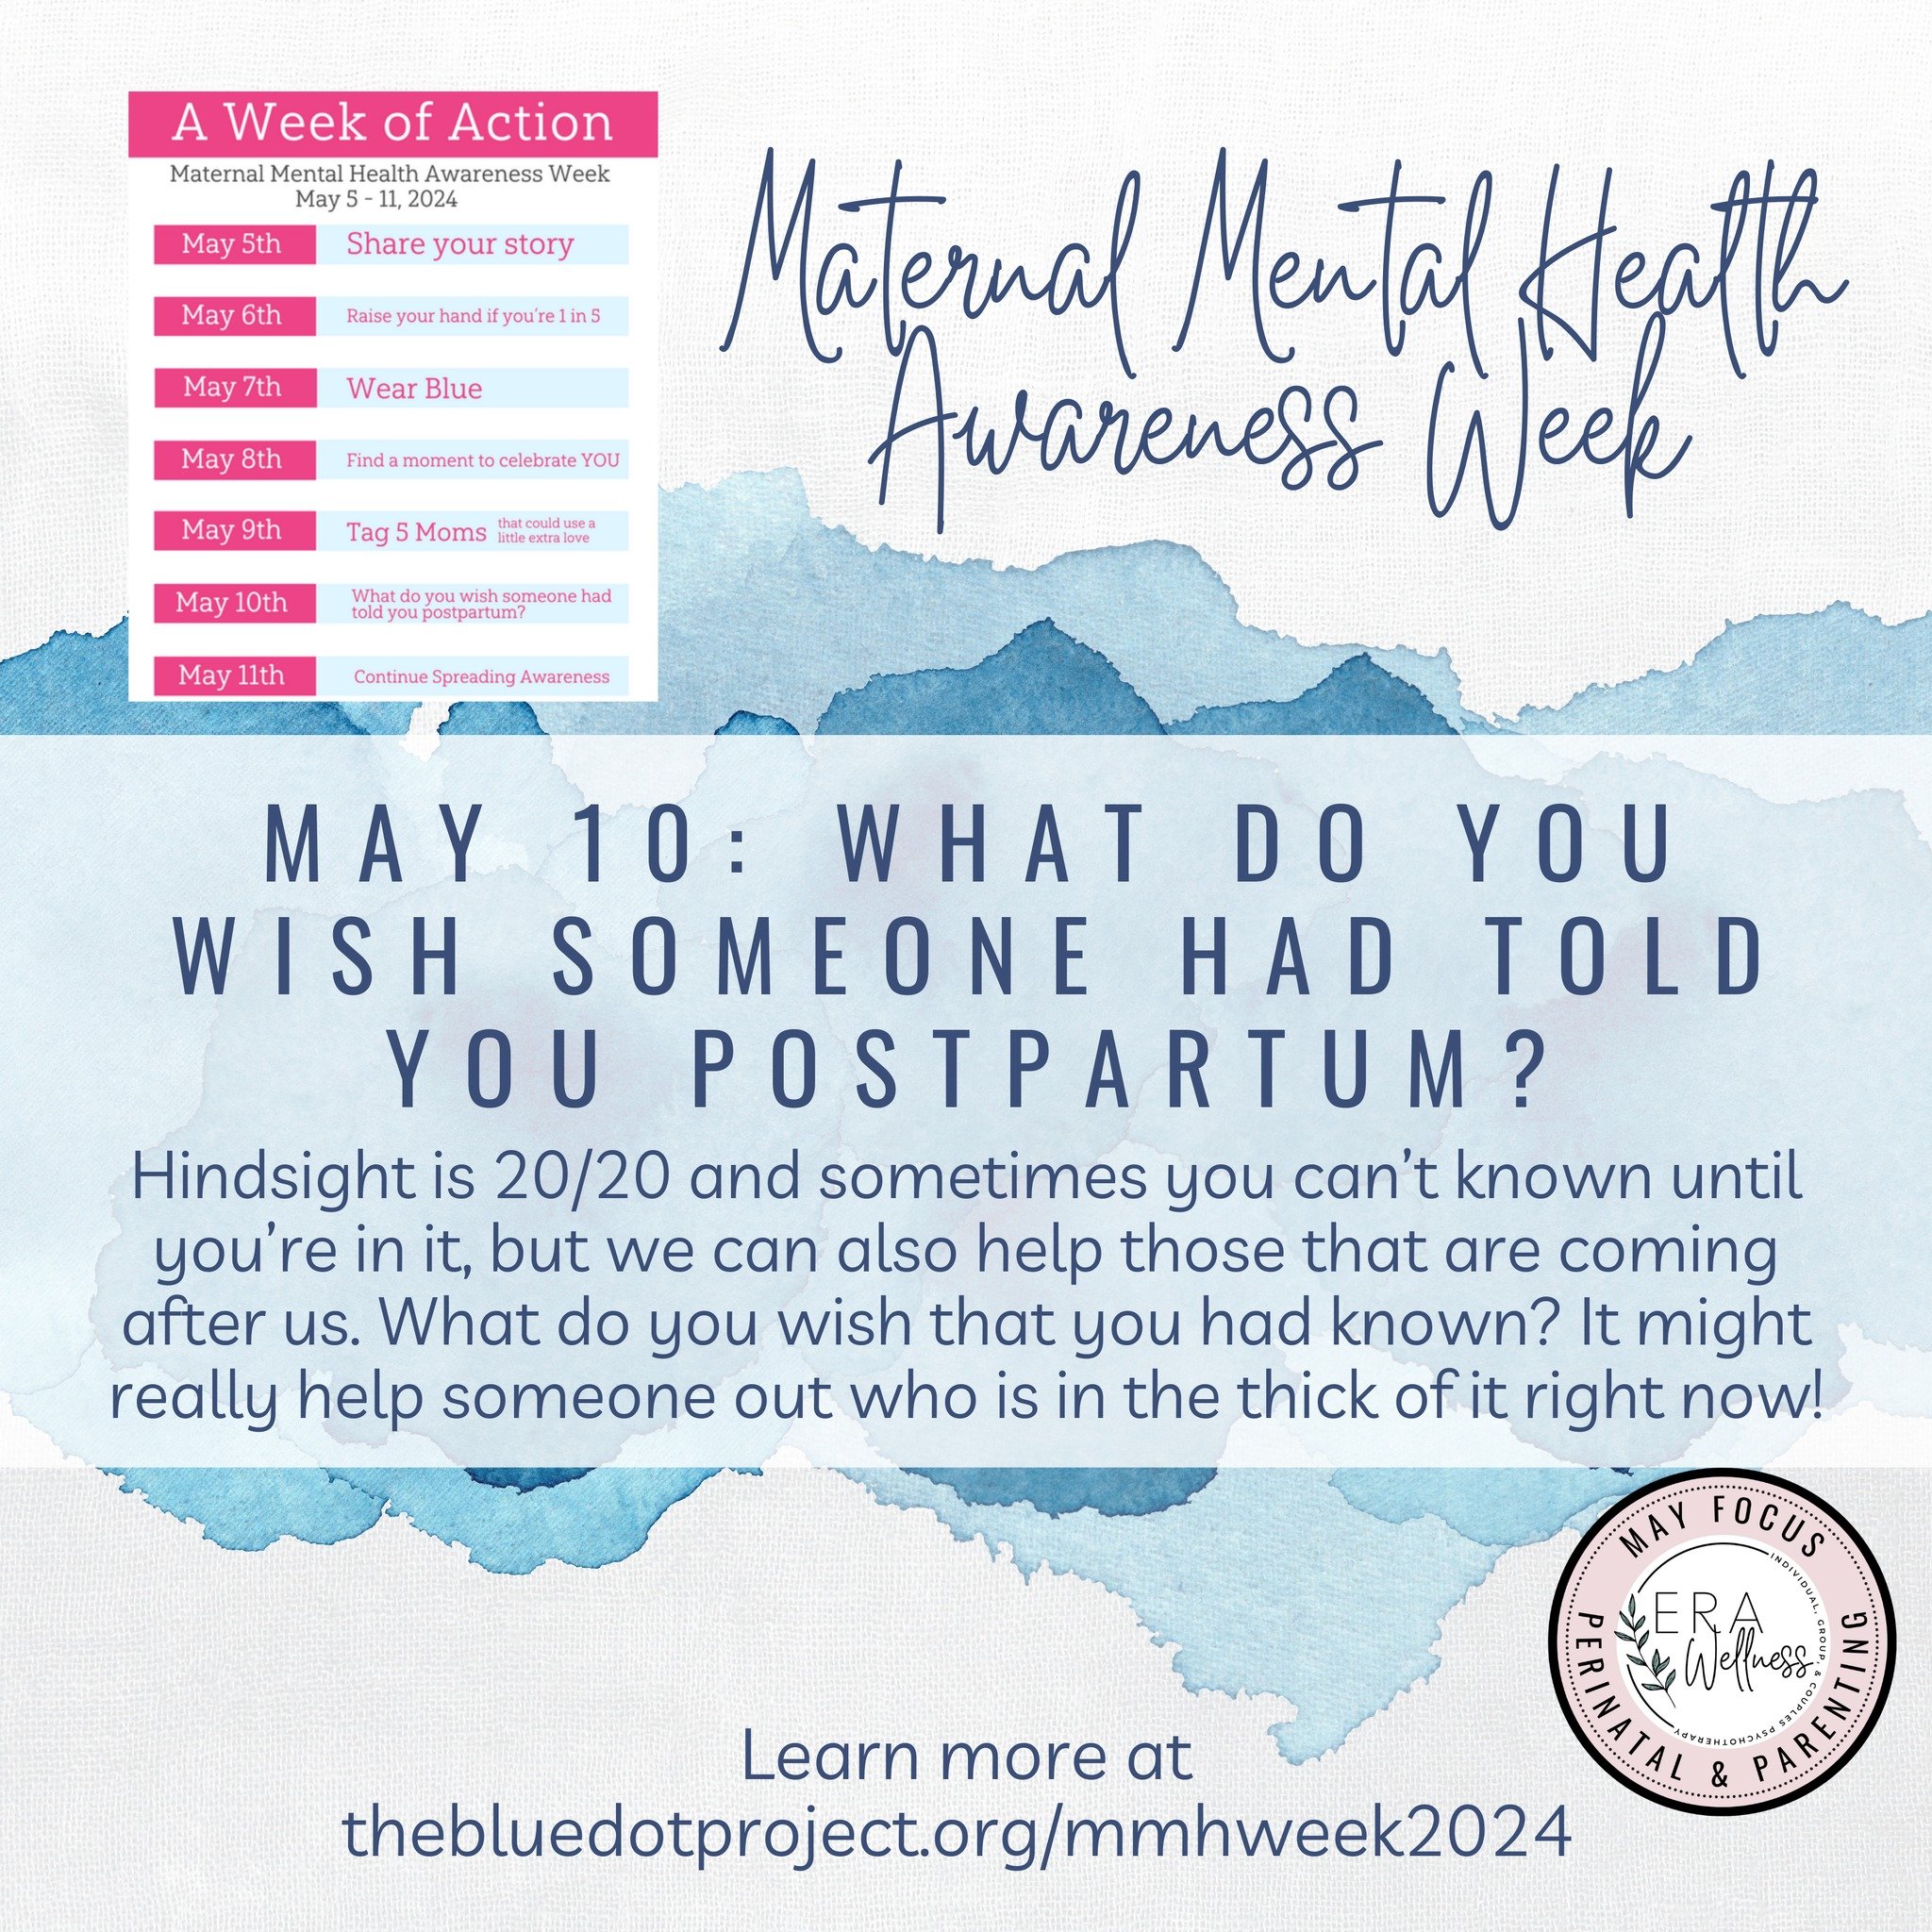 💙 Maternal Mental Health Week 2024 - Storytelling Saves Lives 💙

Friday, May 10: What do you wish someone had told you postpartum?

Hindsight is 20/20 and sometimes you can&rsquo;t known until you&rsquo;re in it, but we can also help those that are